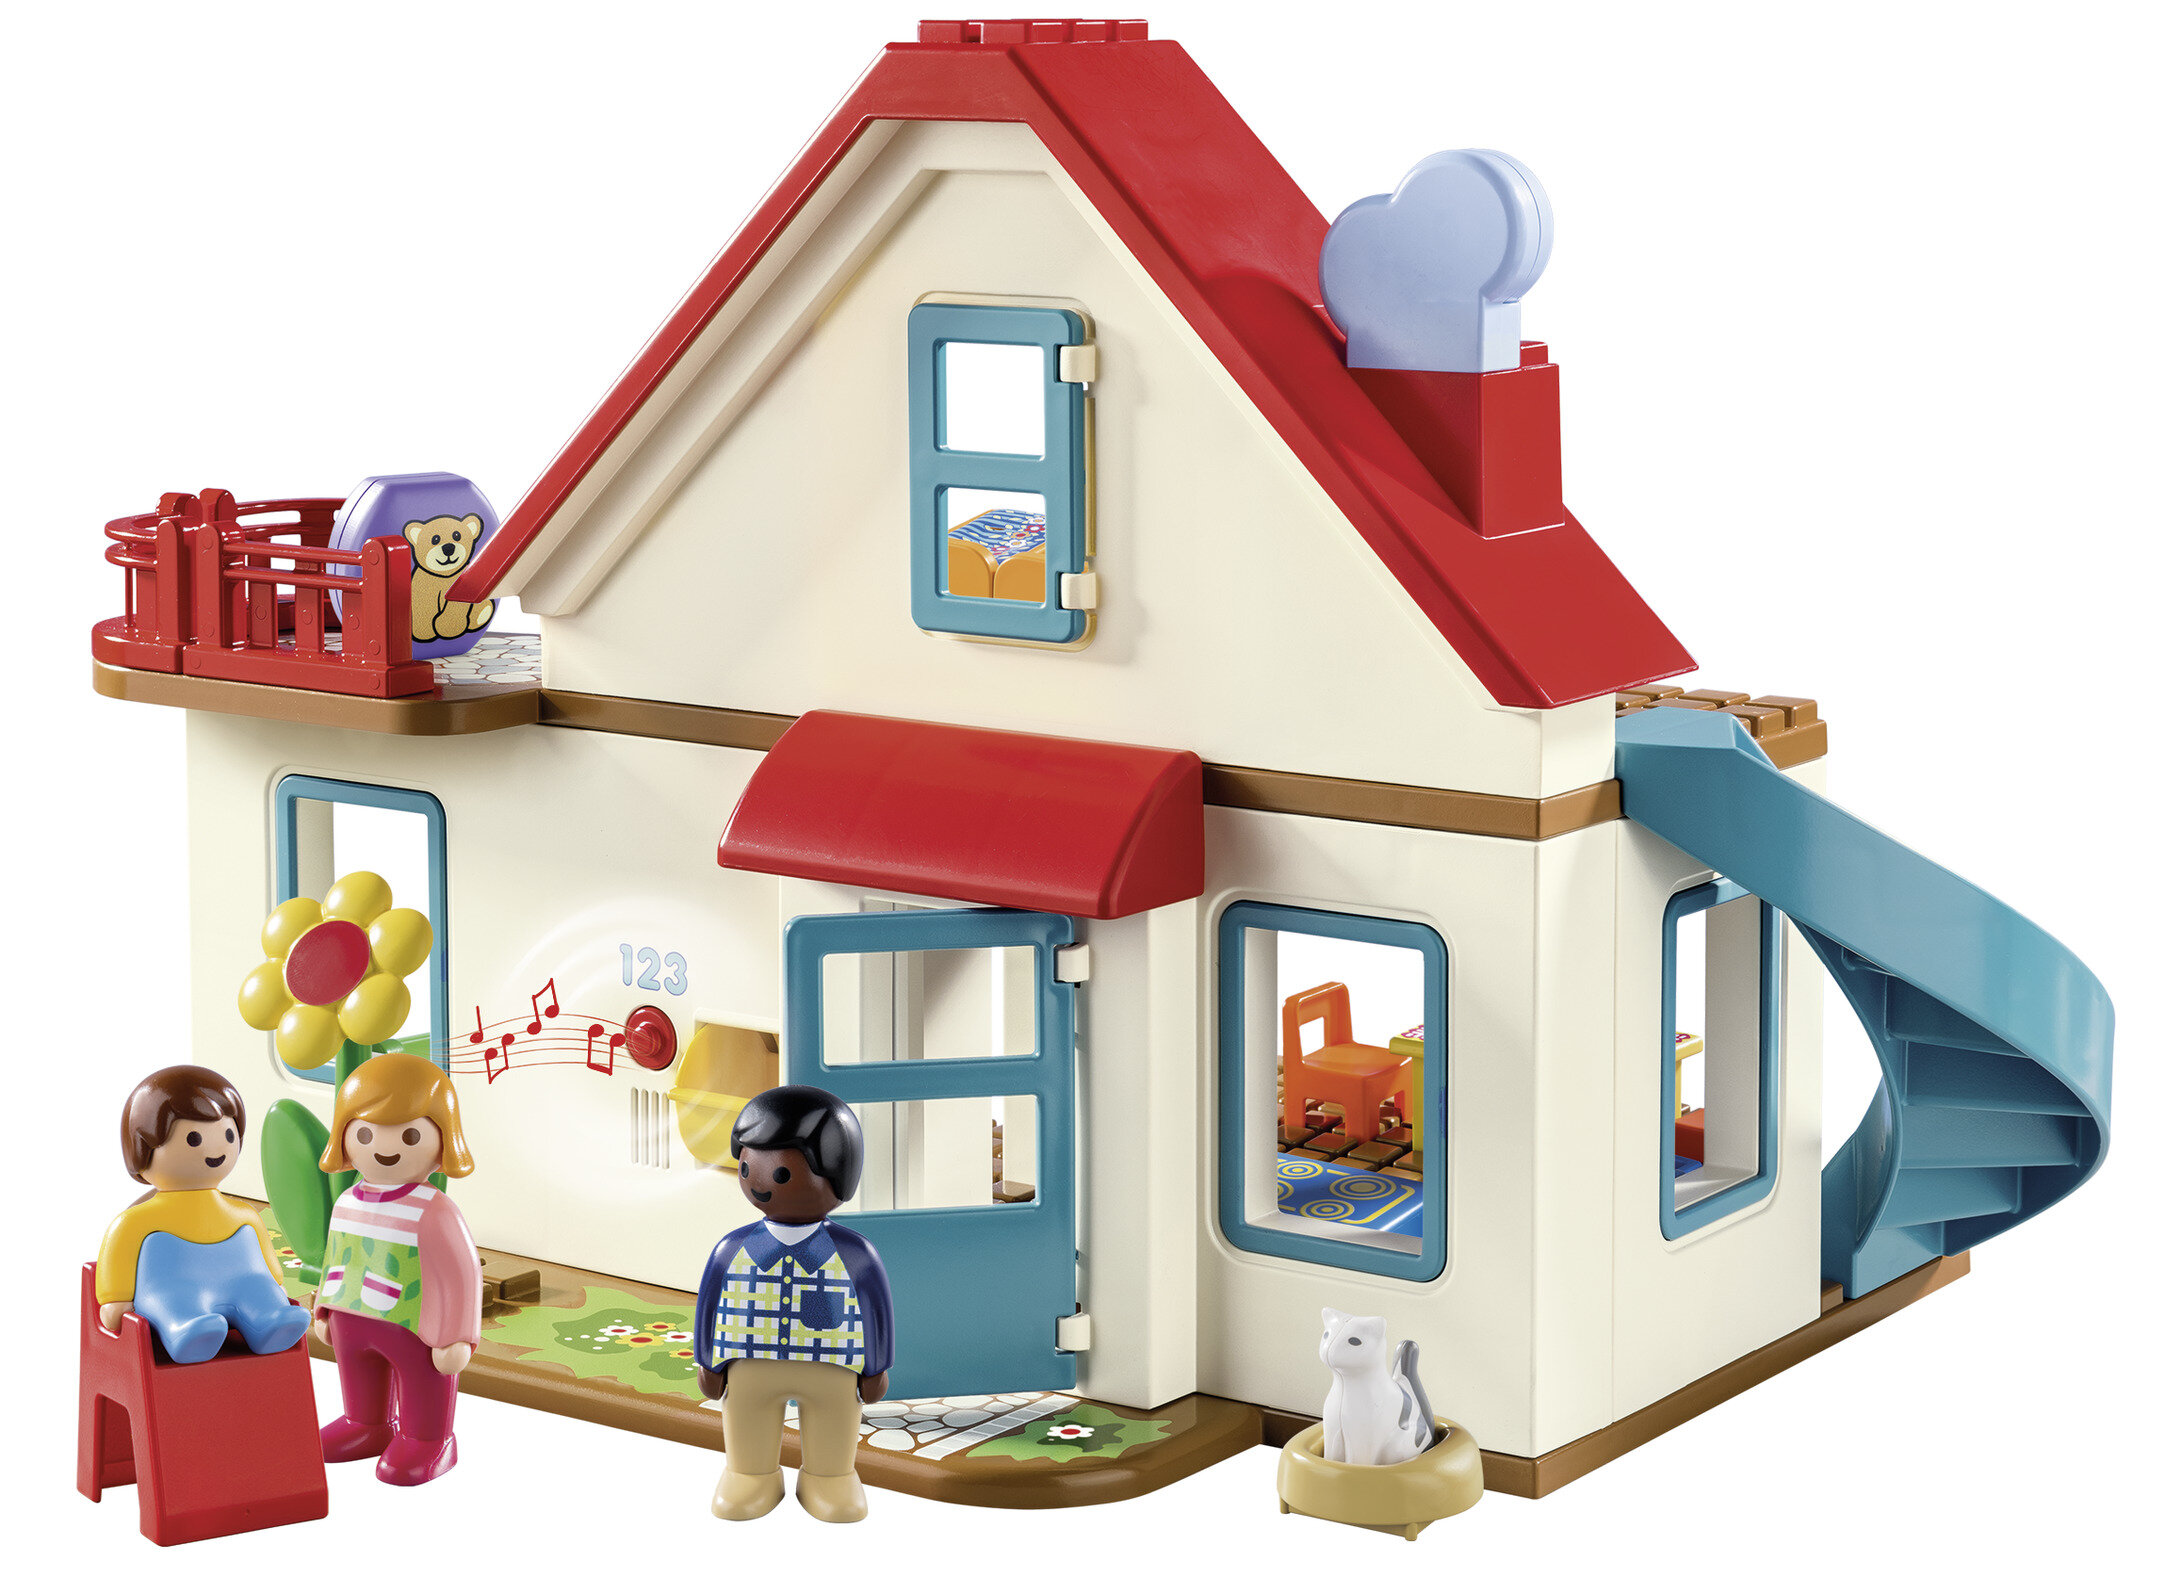 Playmobil 1.2.3 Family Home - image 1 of 5